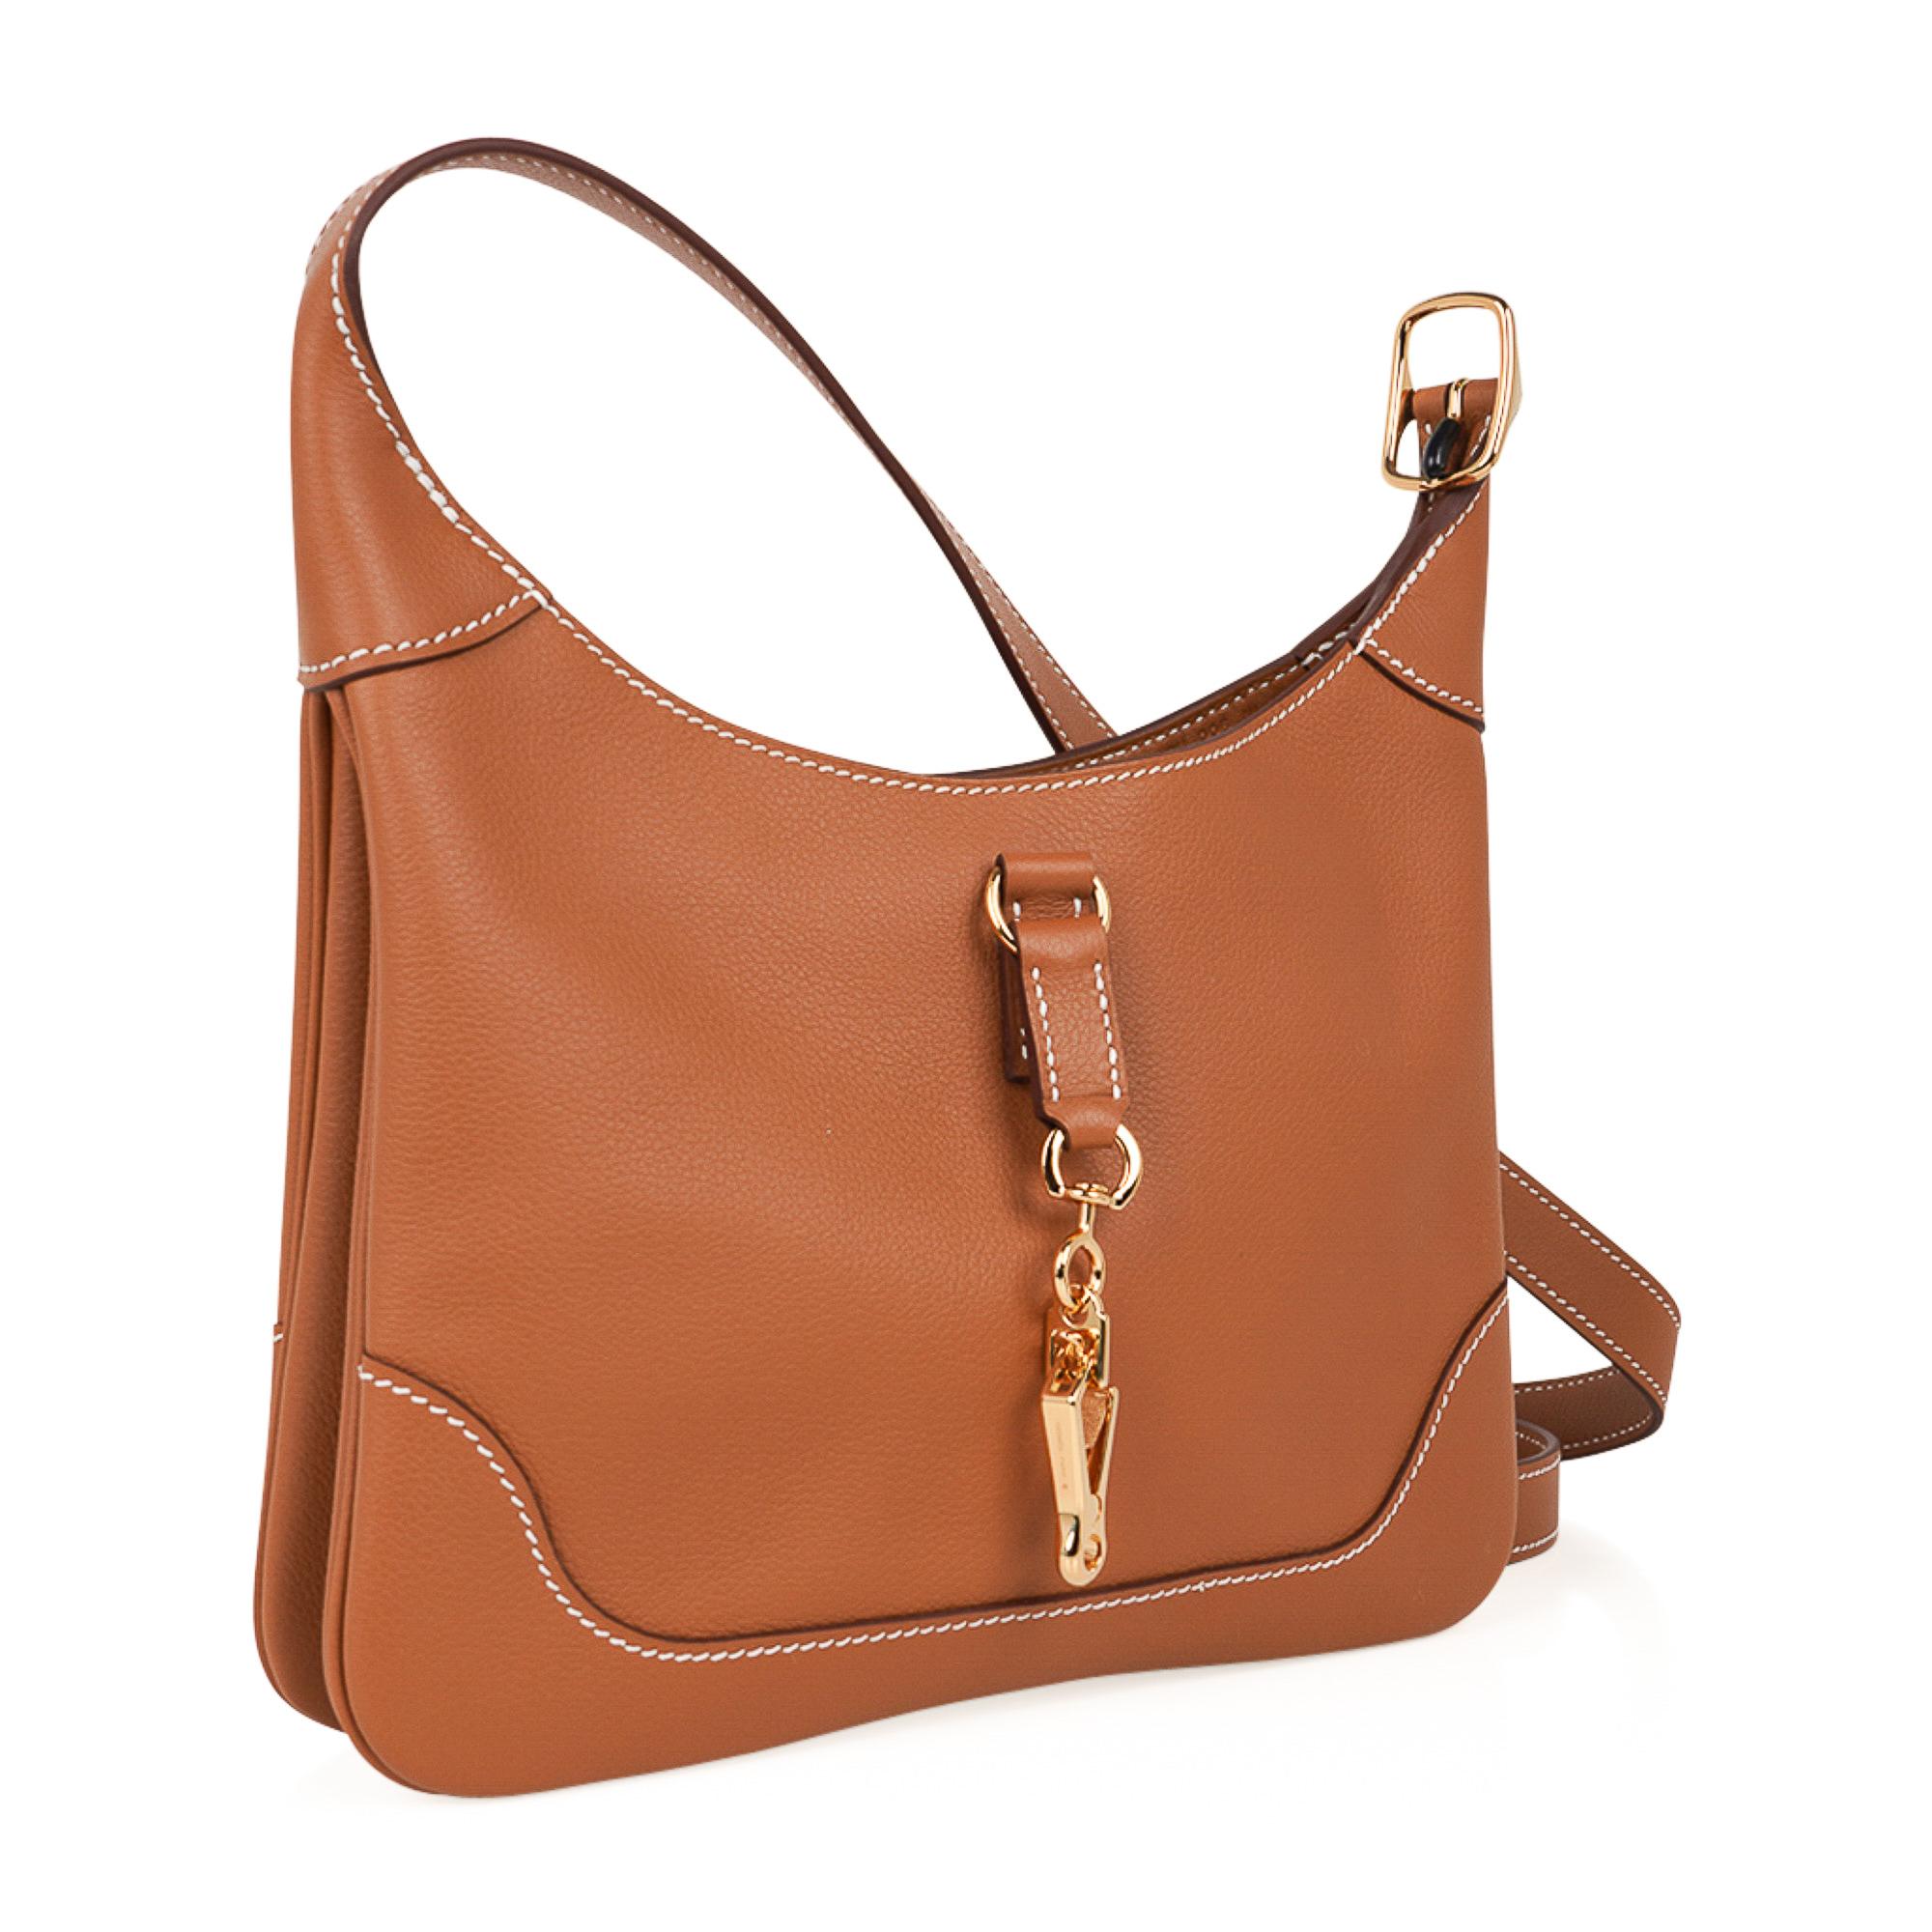 Mightychic offers an Hermes Trim Duo 24 bag featured in Gold with signature bone topstitch.
Evercolor Calfskin leather with Gold hardware.
Interior pocket with zip closure with open compartment on each side.
Adjustable shoulder strap to wear as a